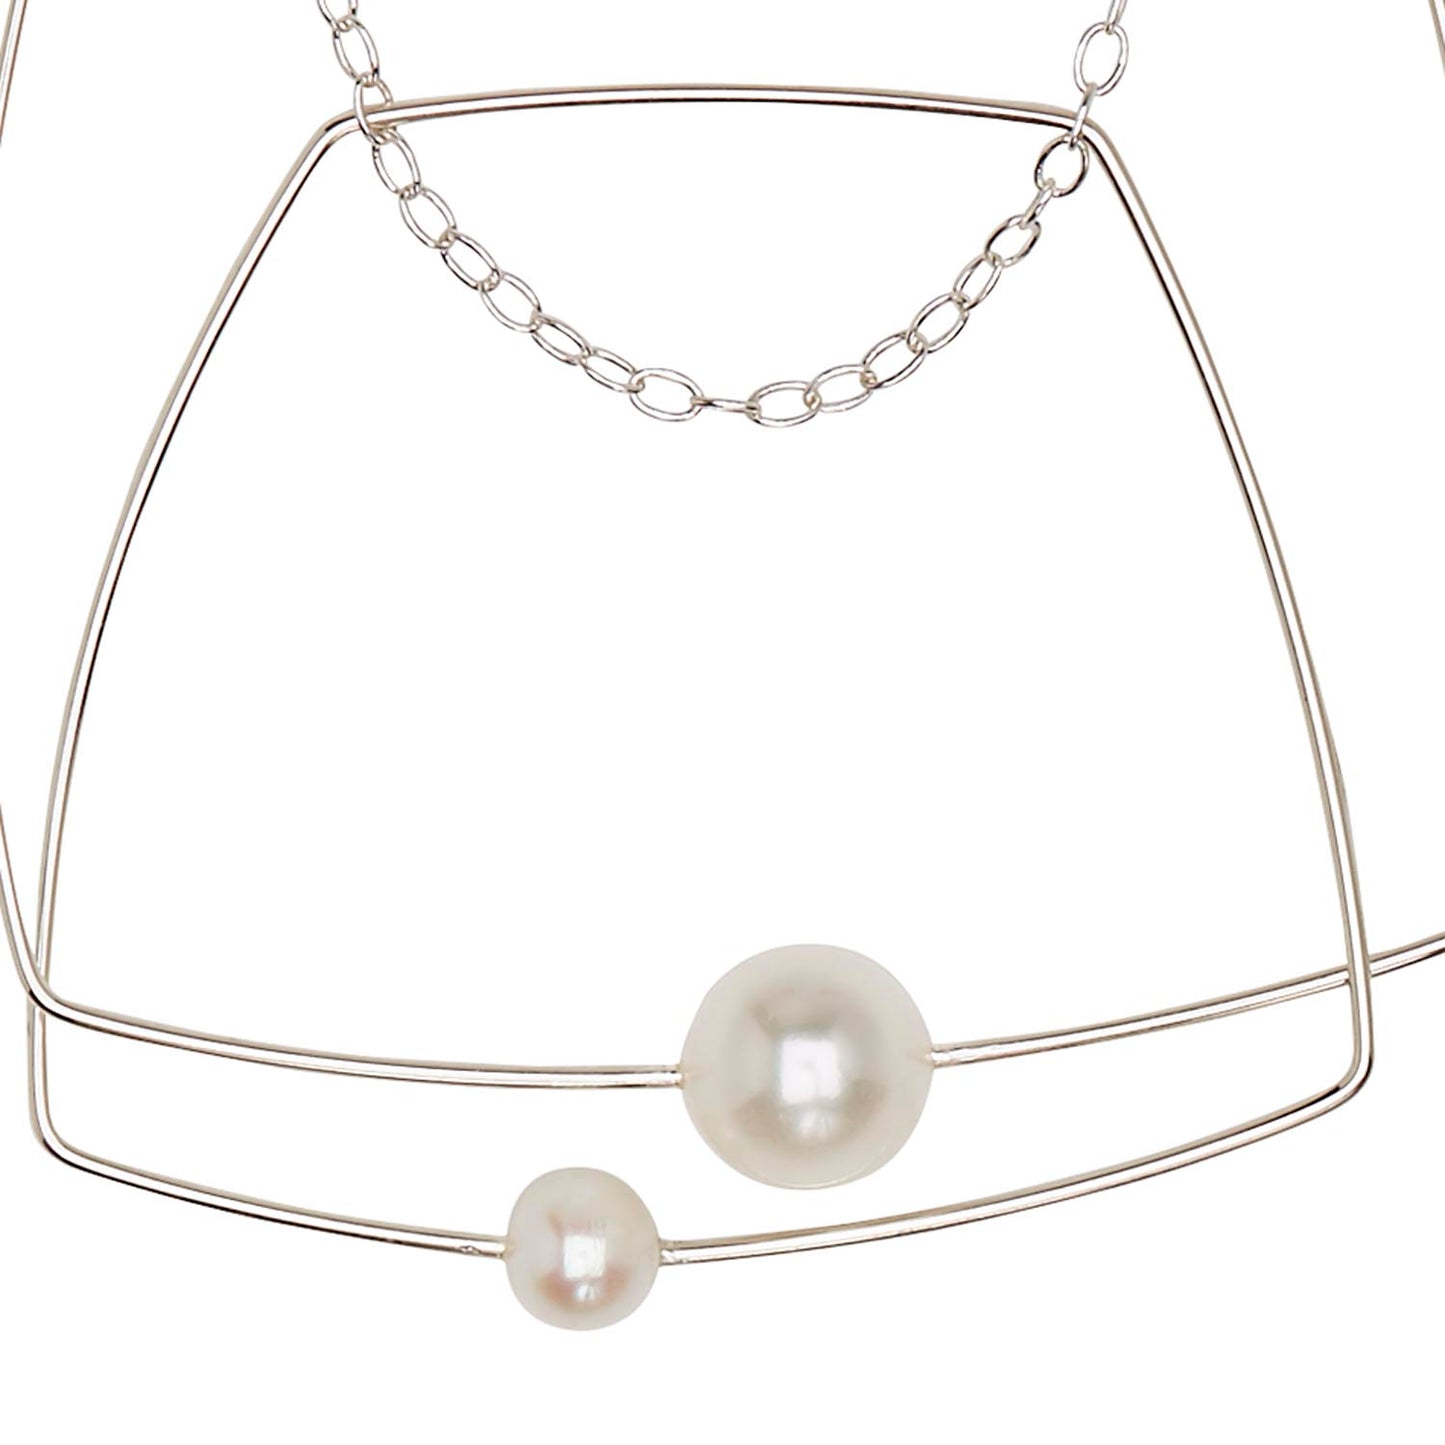 Double Square Pendant Necklace with White Pearls